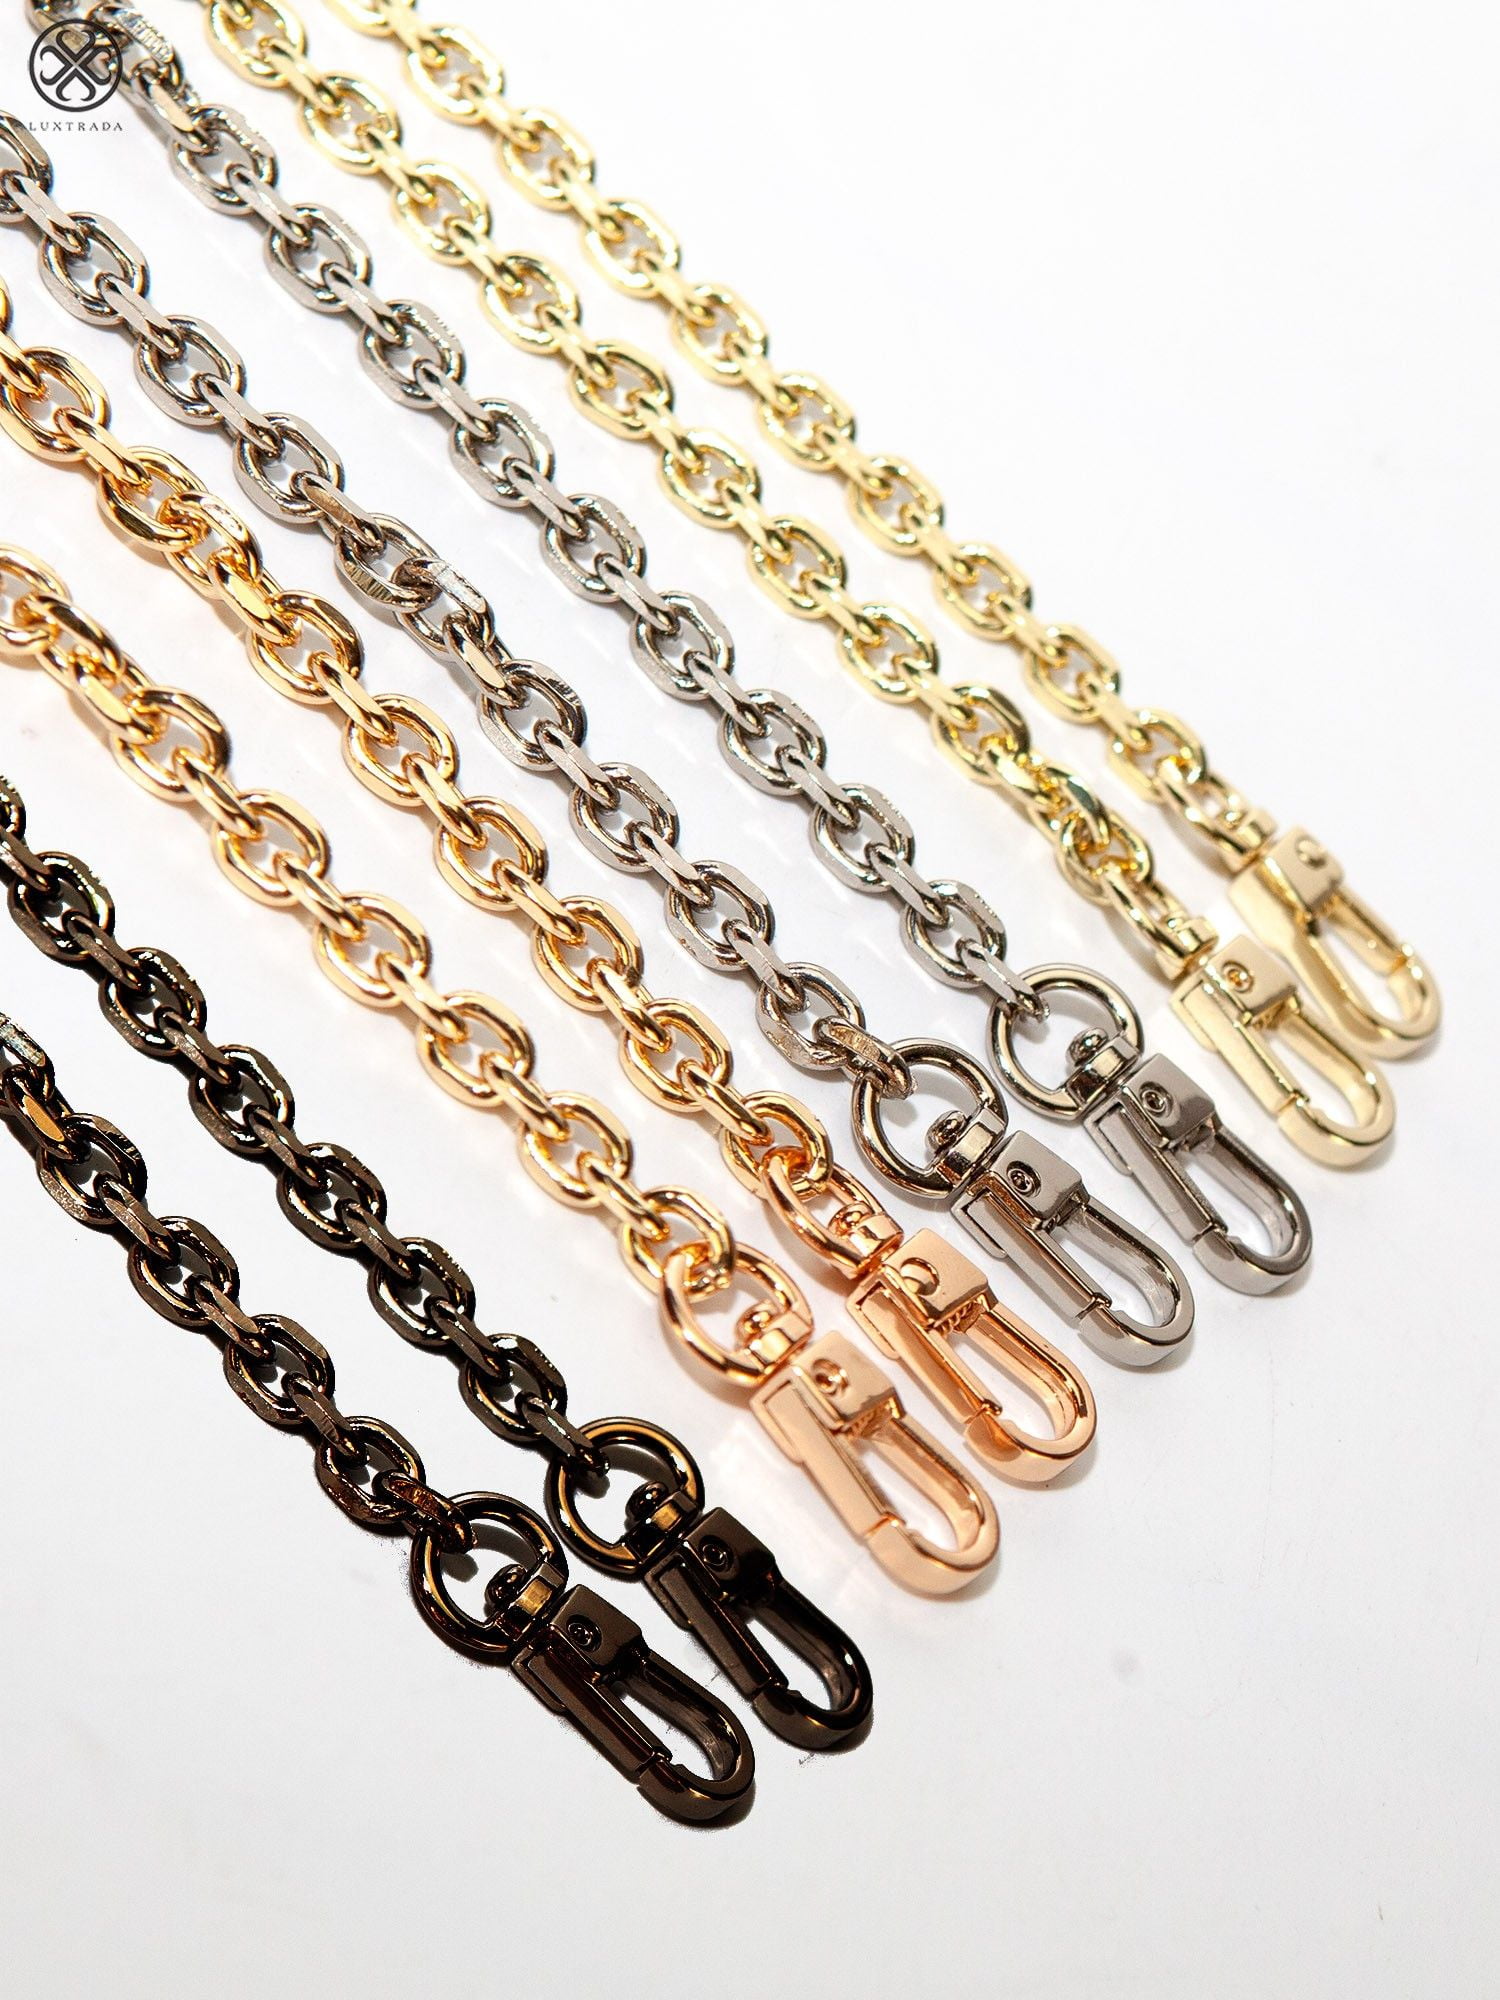 Luxiv Purse Chain Replacement, Women Purse Chains India | Ubuy